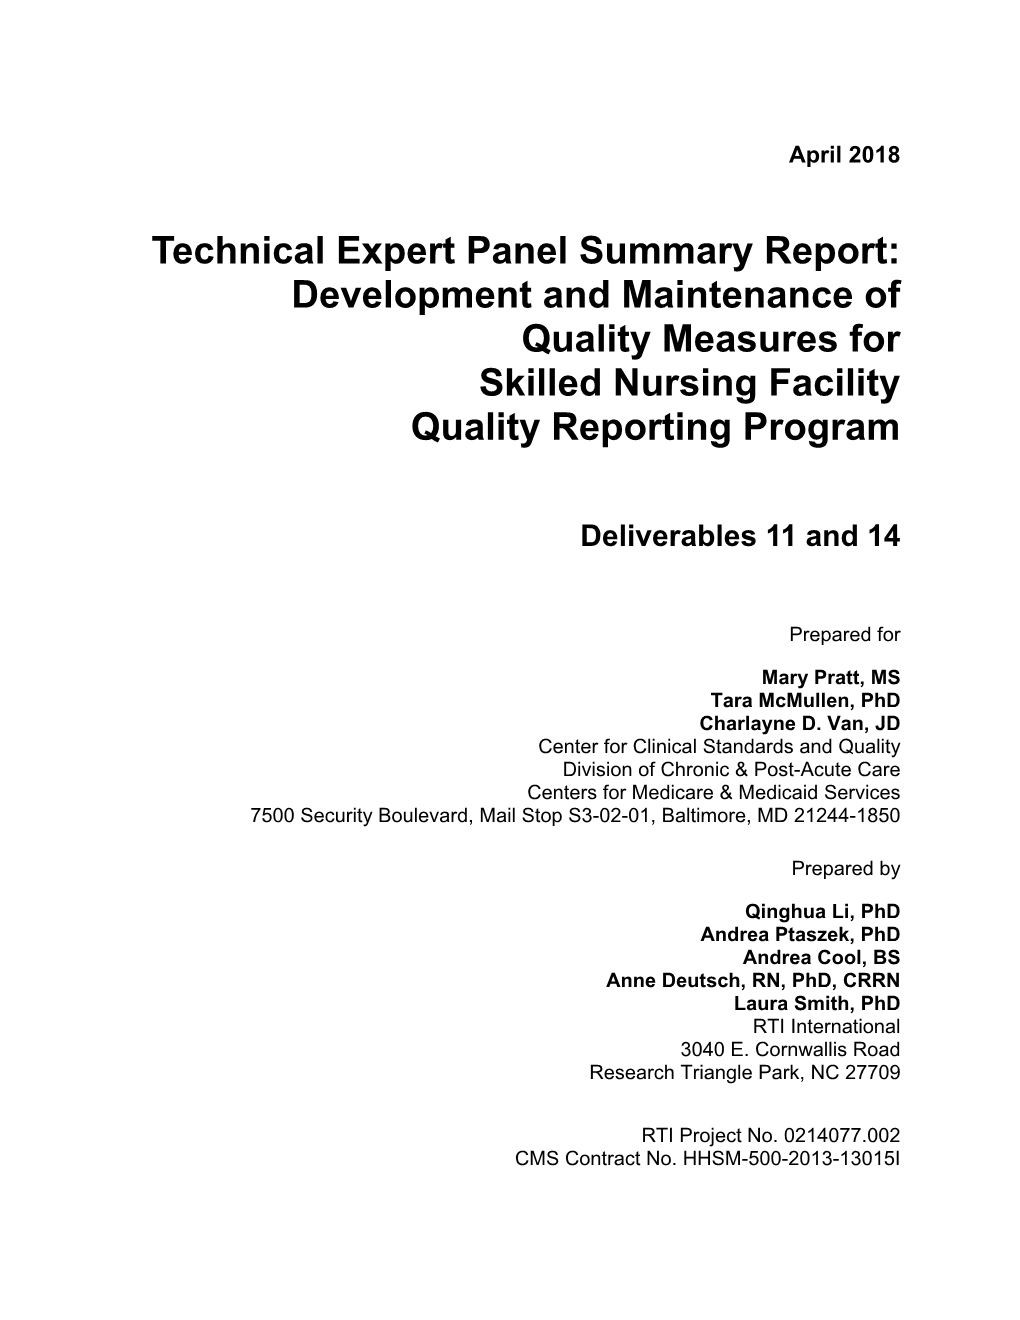 Technical Expert Panel Summary Report: Development and Maintenance of Quality Measures for Skilled Nursing Facility Quality Reporting Program